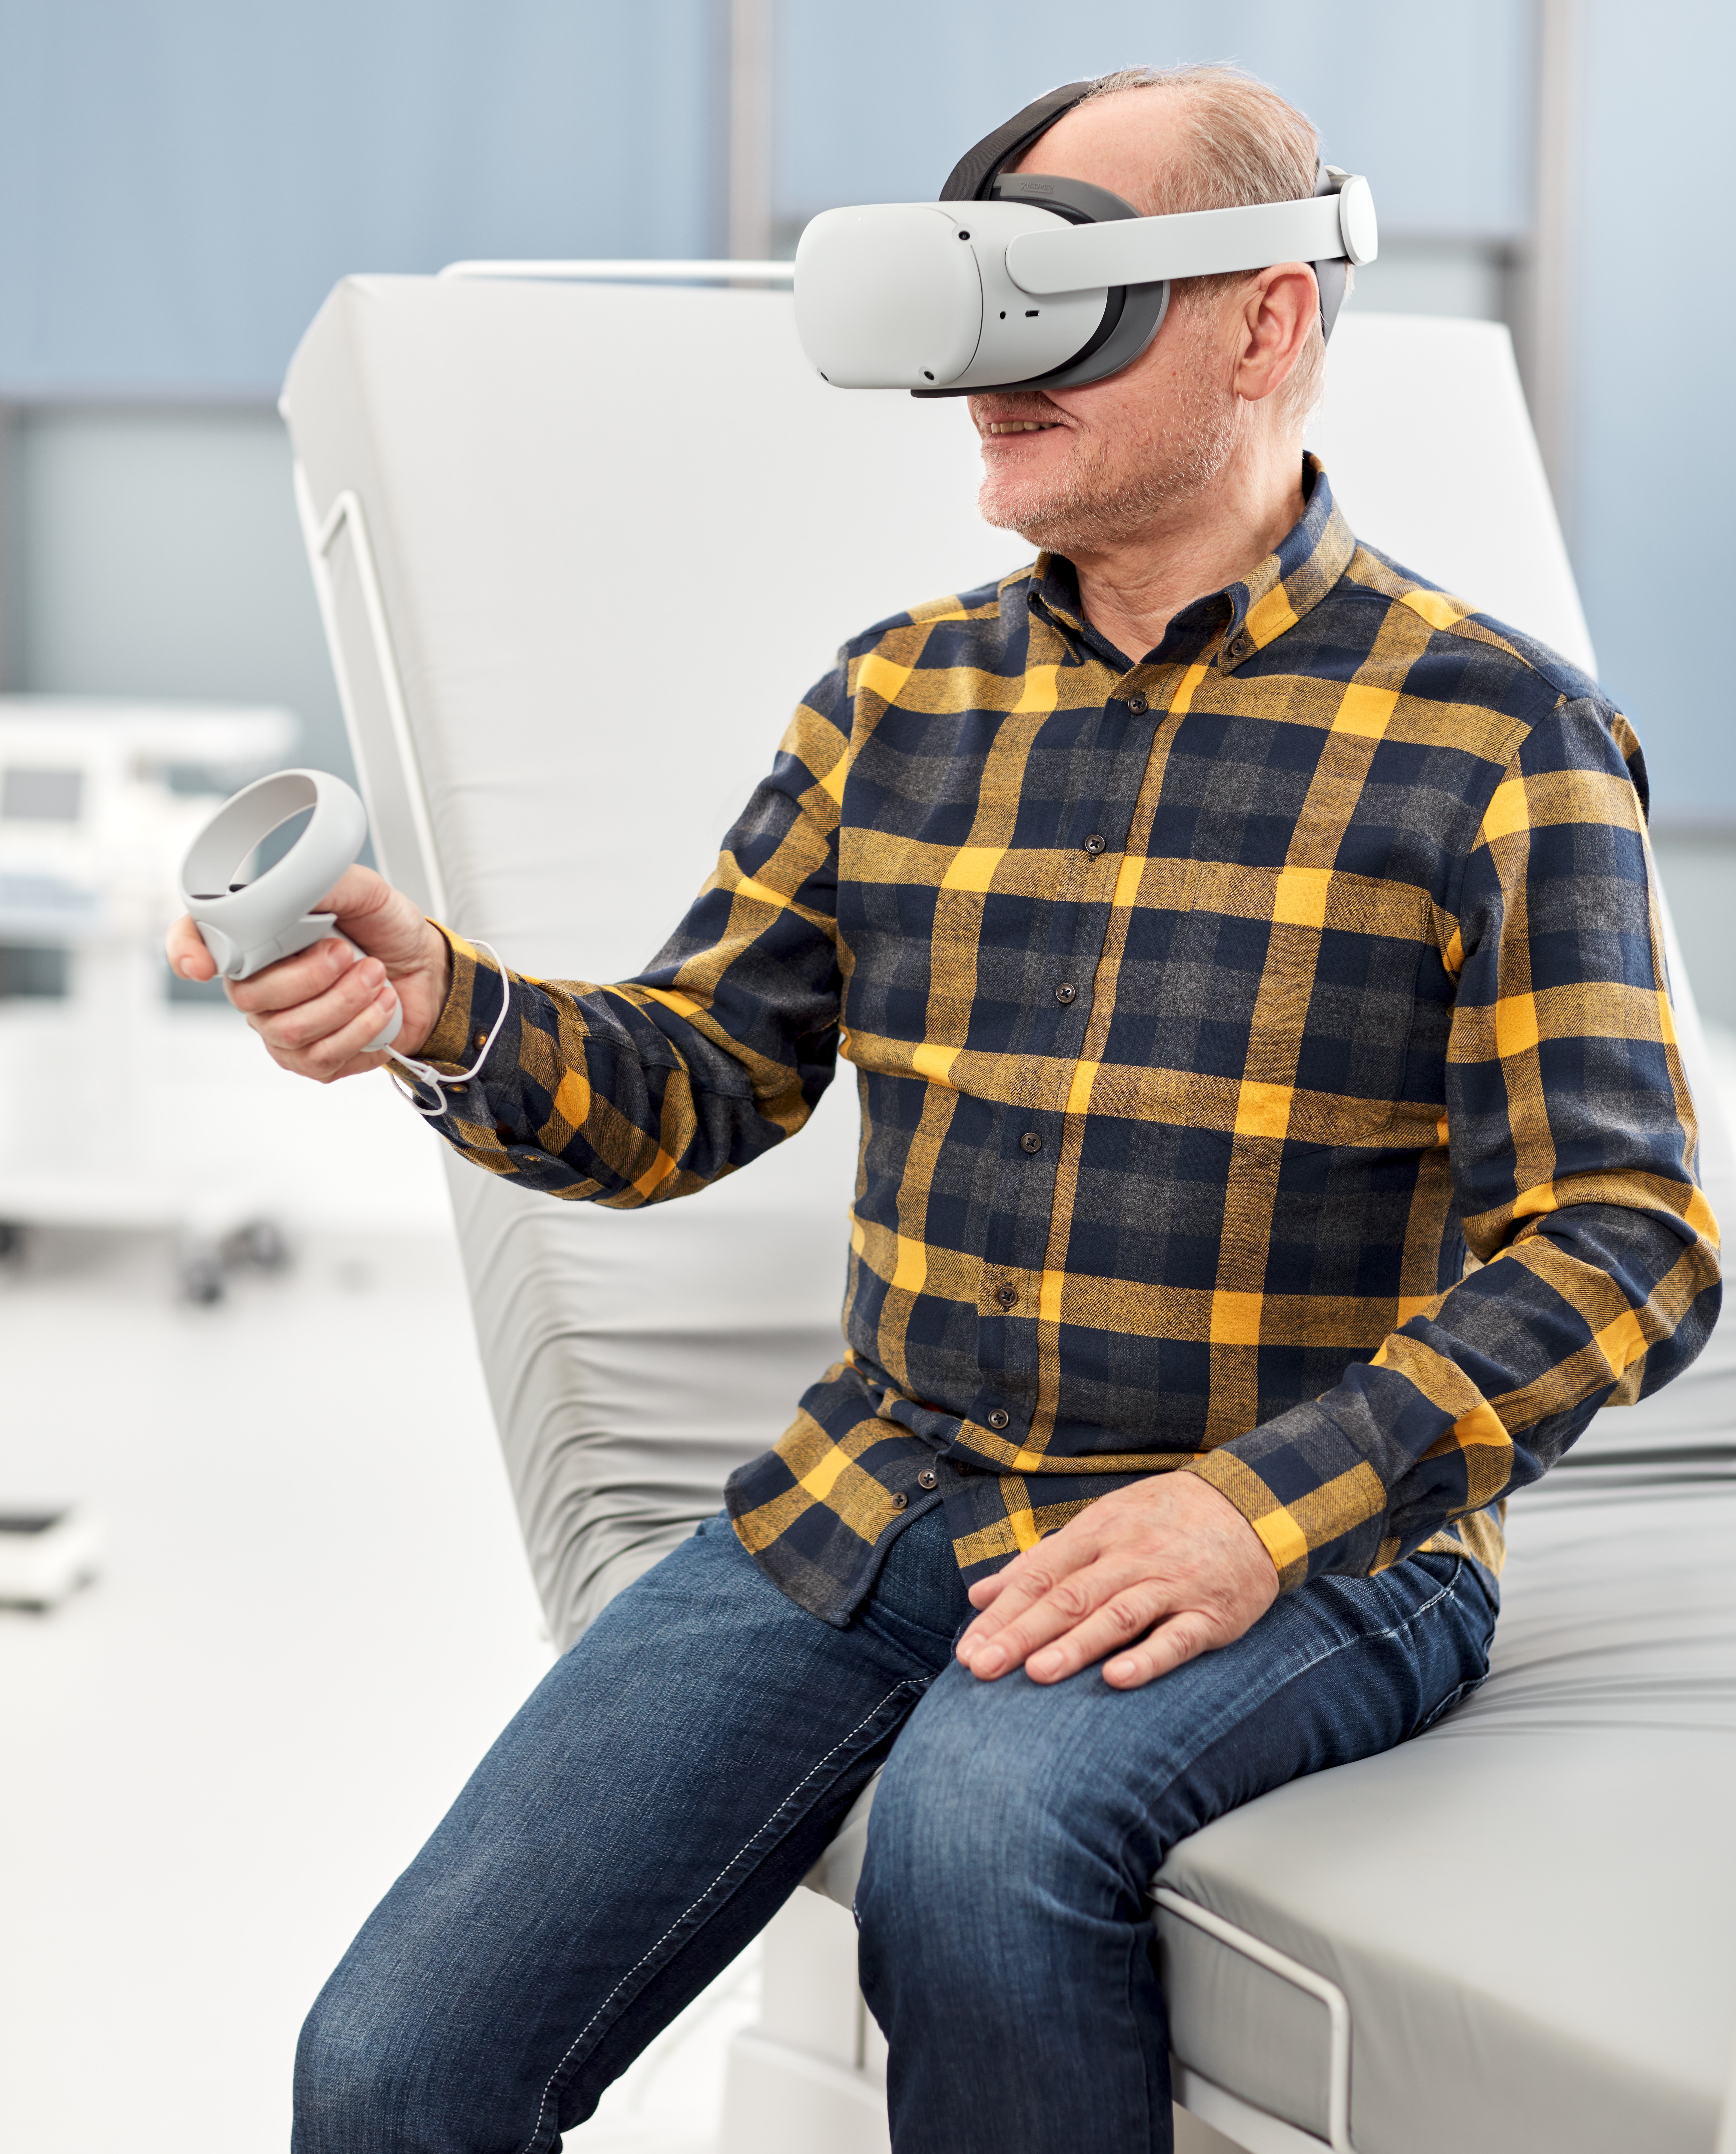 Patient training in virtual reality at hospital